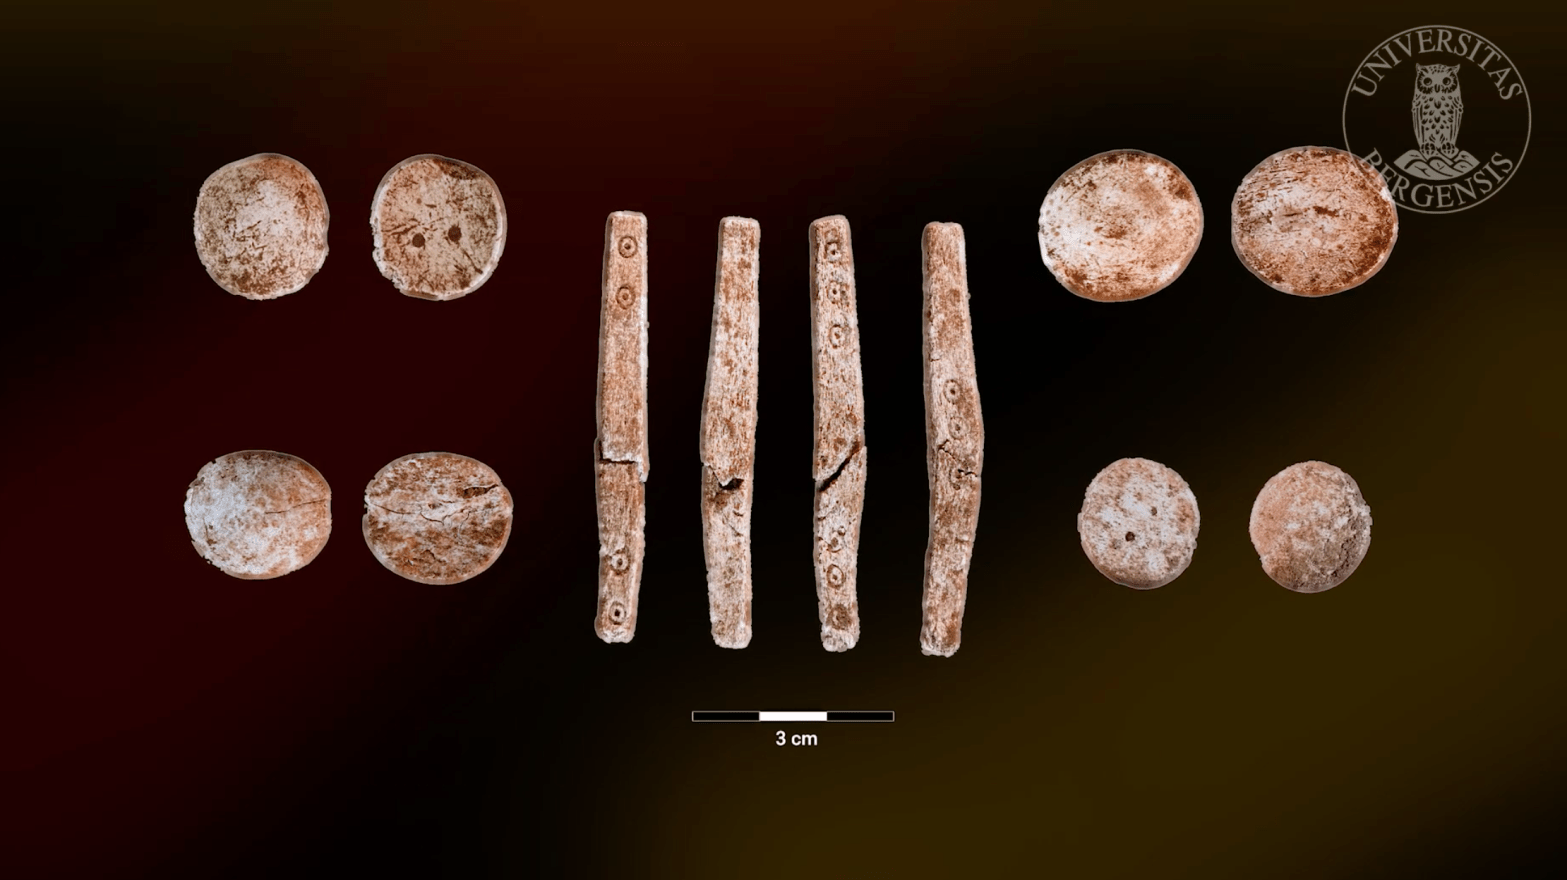 Several game chips (showing both sides of each) and a rare four-sided elongated dice (showing all four sides) found in the cremation pit.  (Image: University of Bergen)